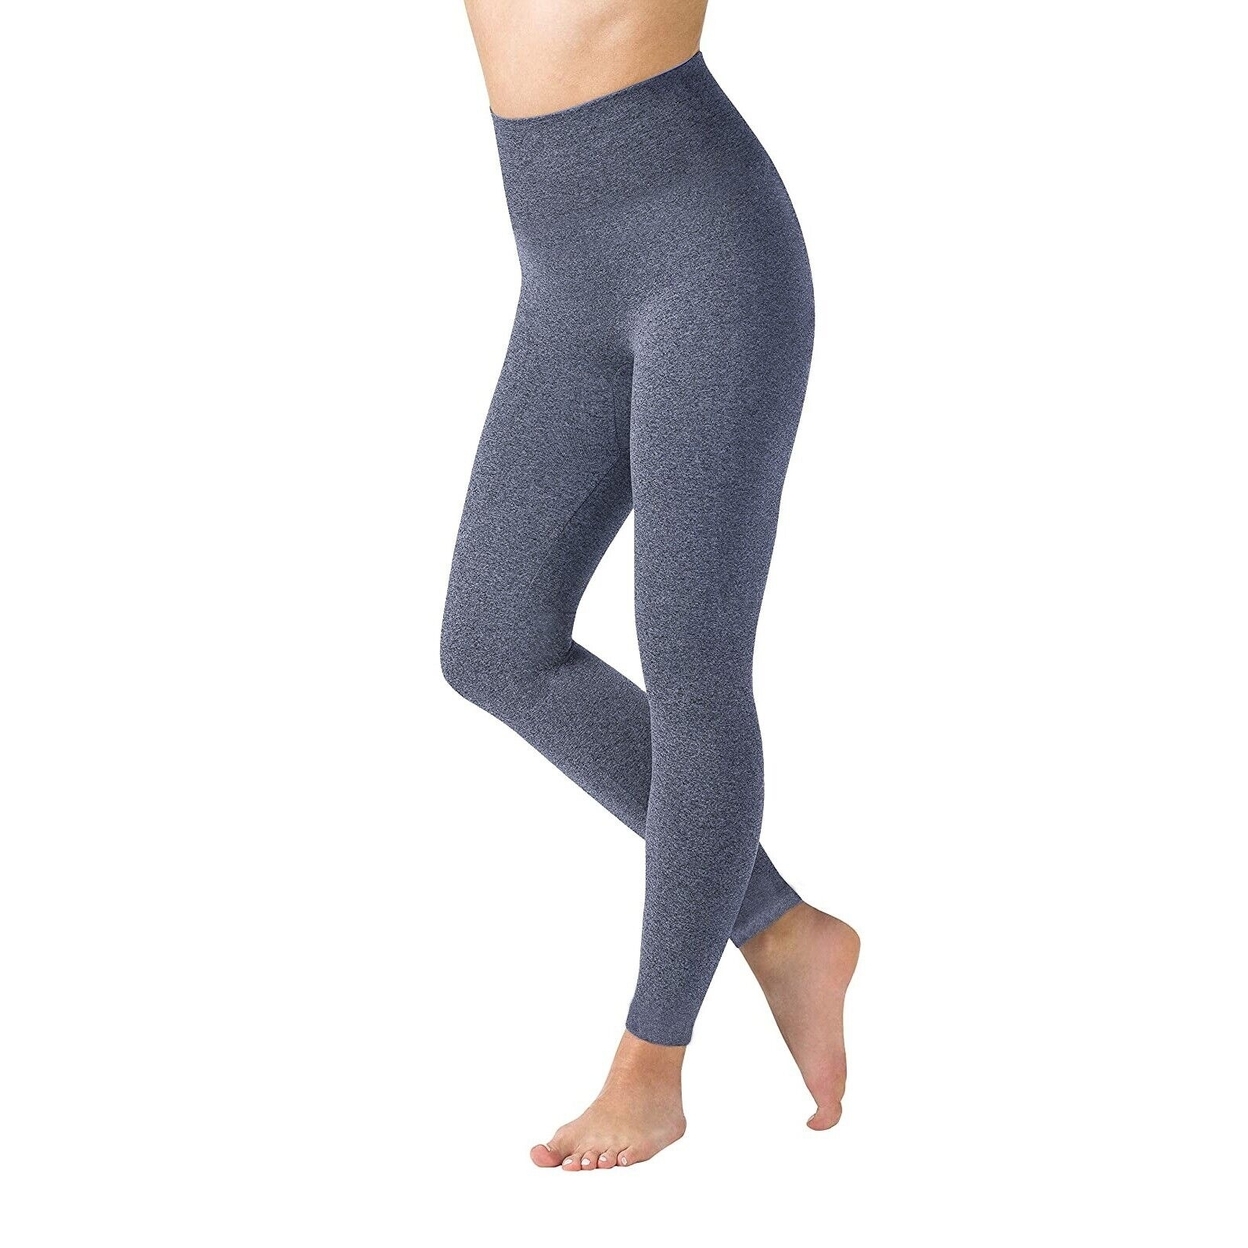 Multi-Packs Women High Waisted Fleece Lined Marled Leggings Ultra Soft Warm Pant - Charcoal/navy, 2, Large